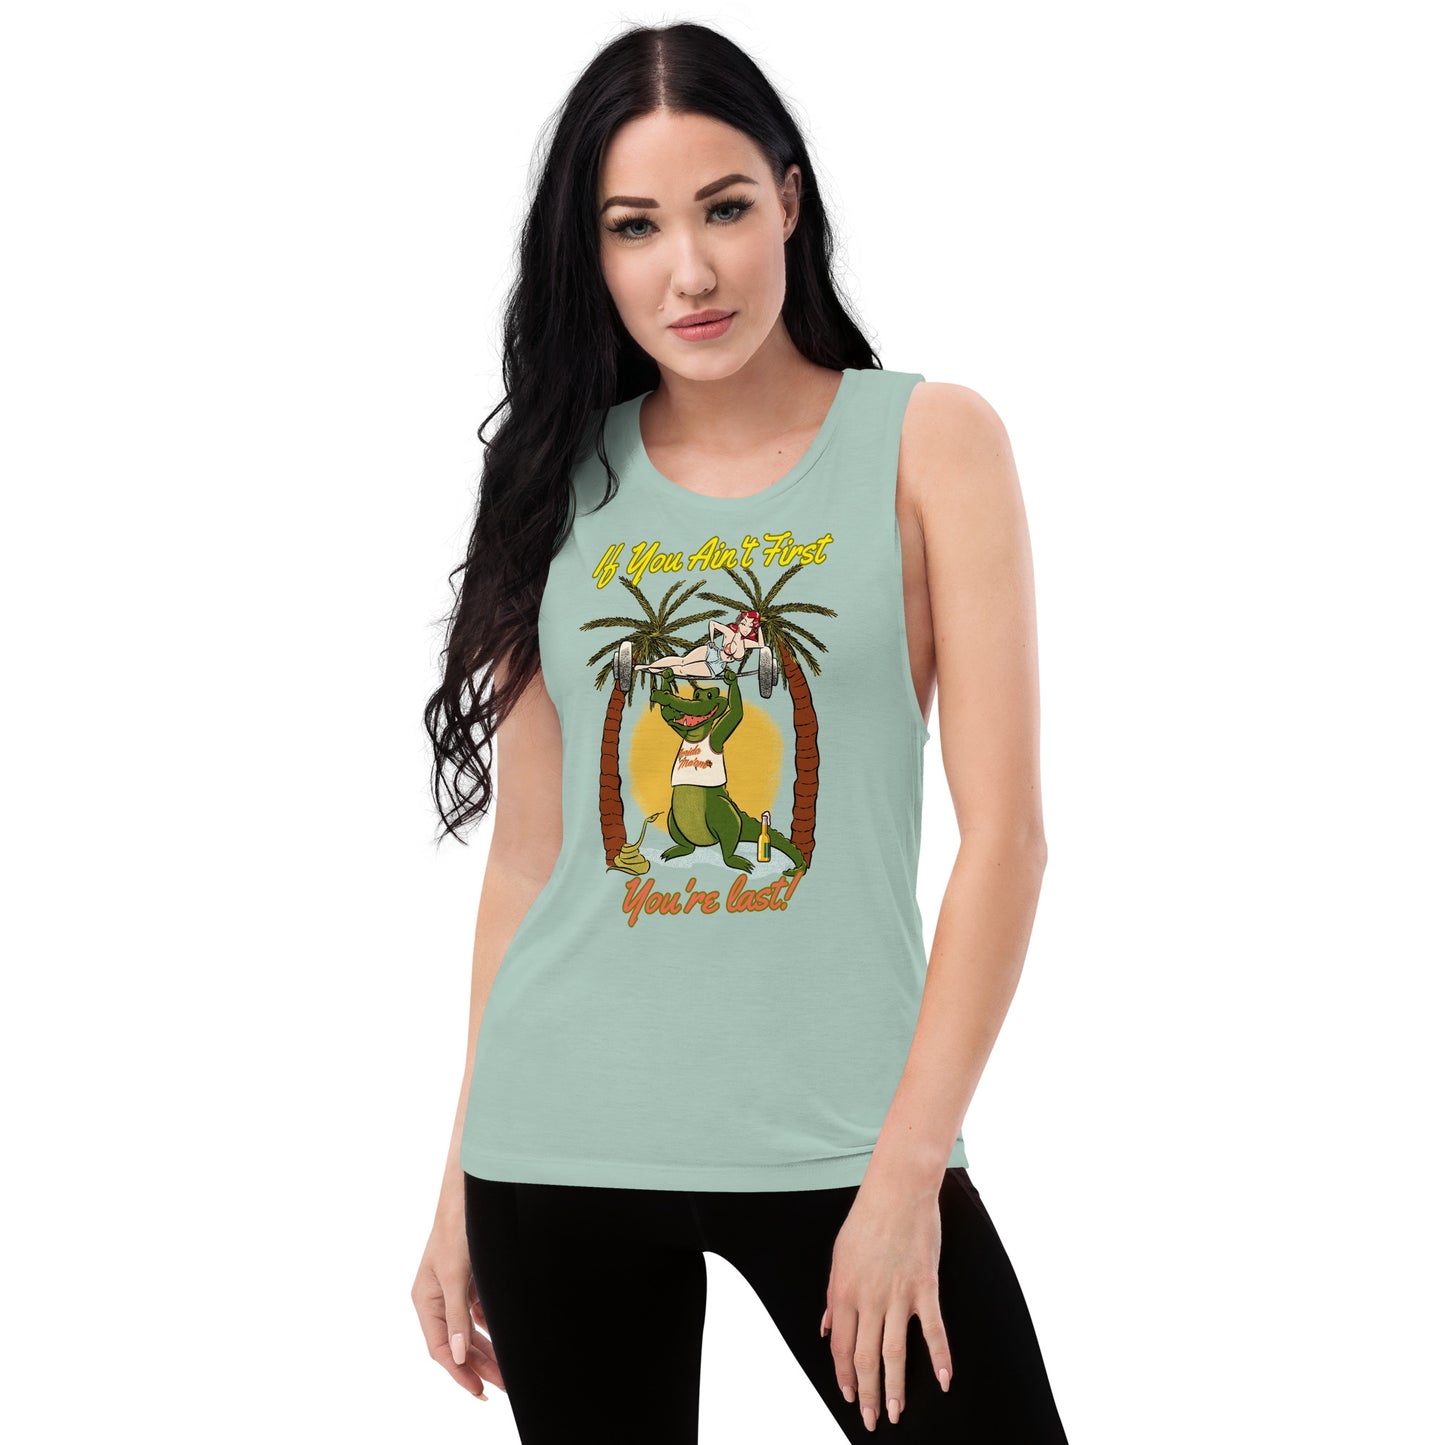 Foxy Roxy First Place Ladies’ Muscle Tank